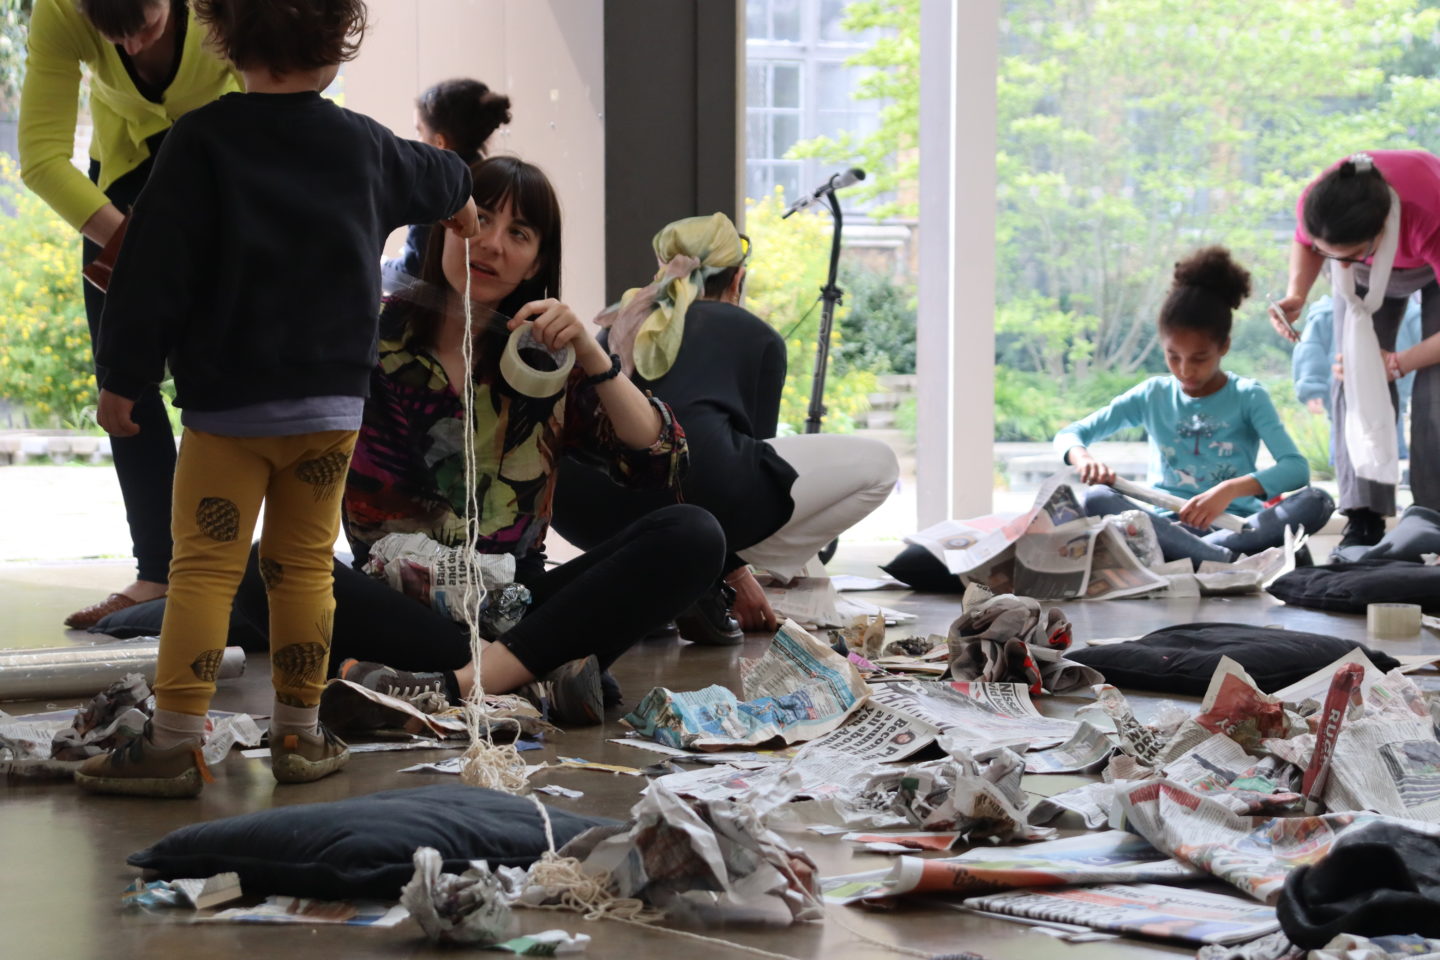 Children making newspaper sculptures in a room with large windows and newspaper scattered on the floor